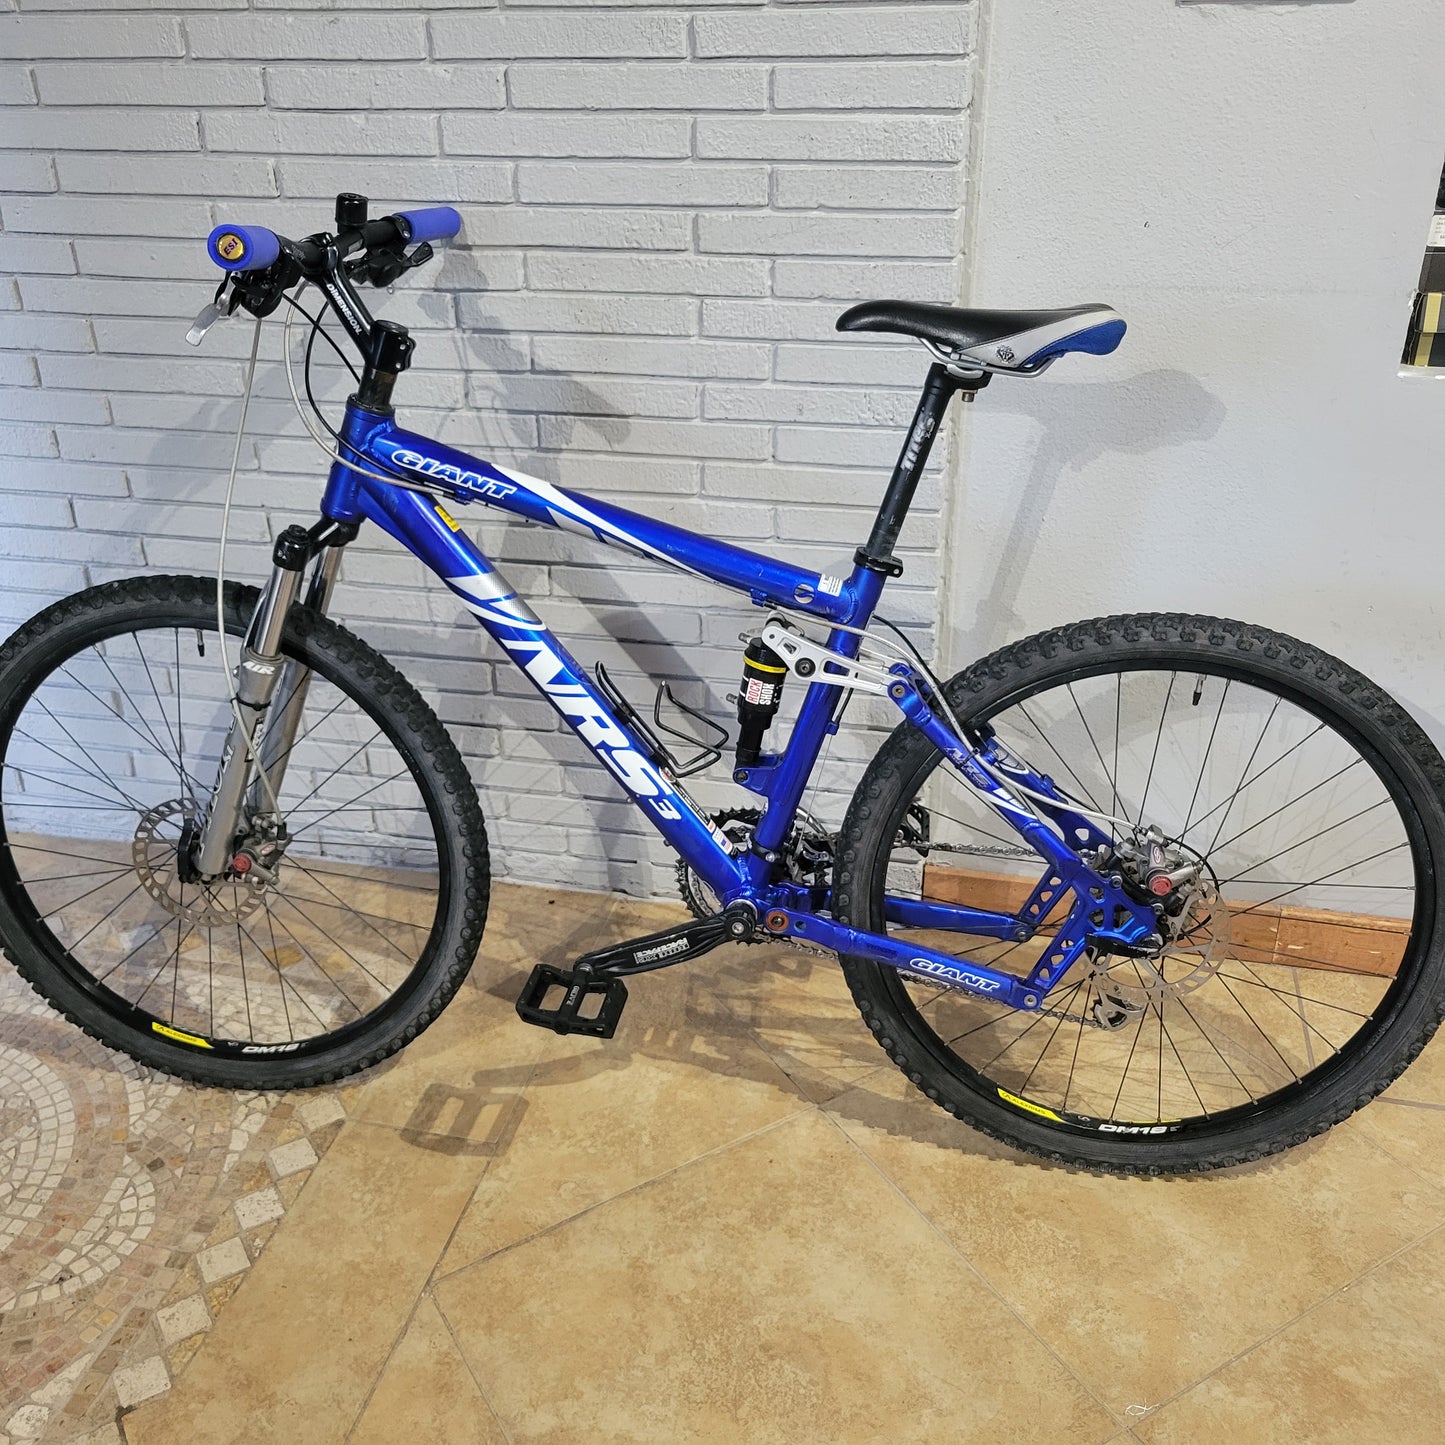 2003 Giant NRS 3 Size 16.5